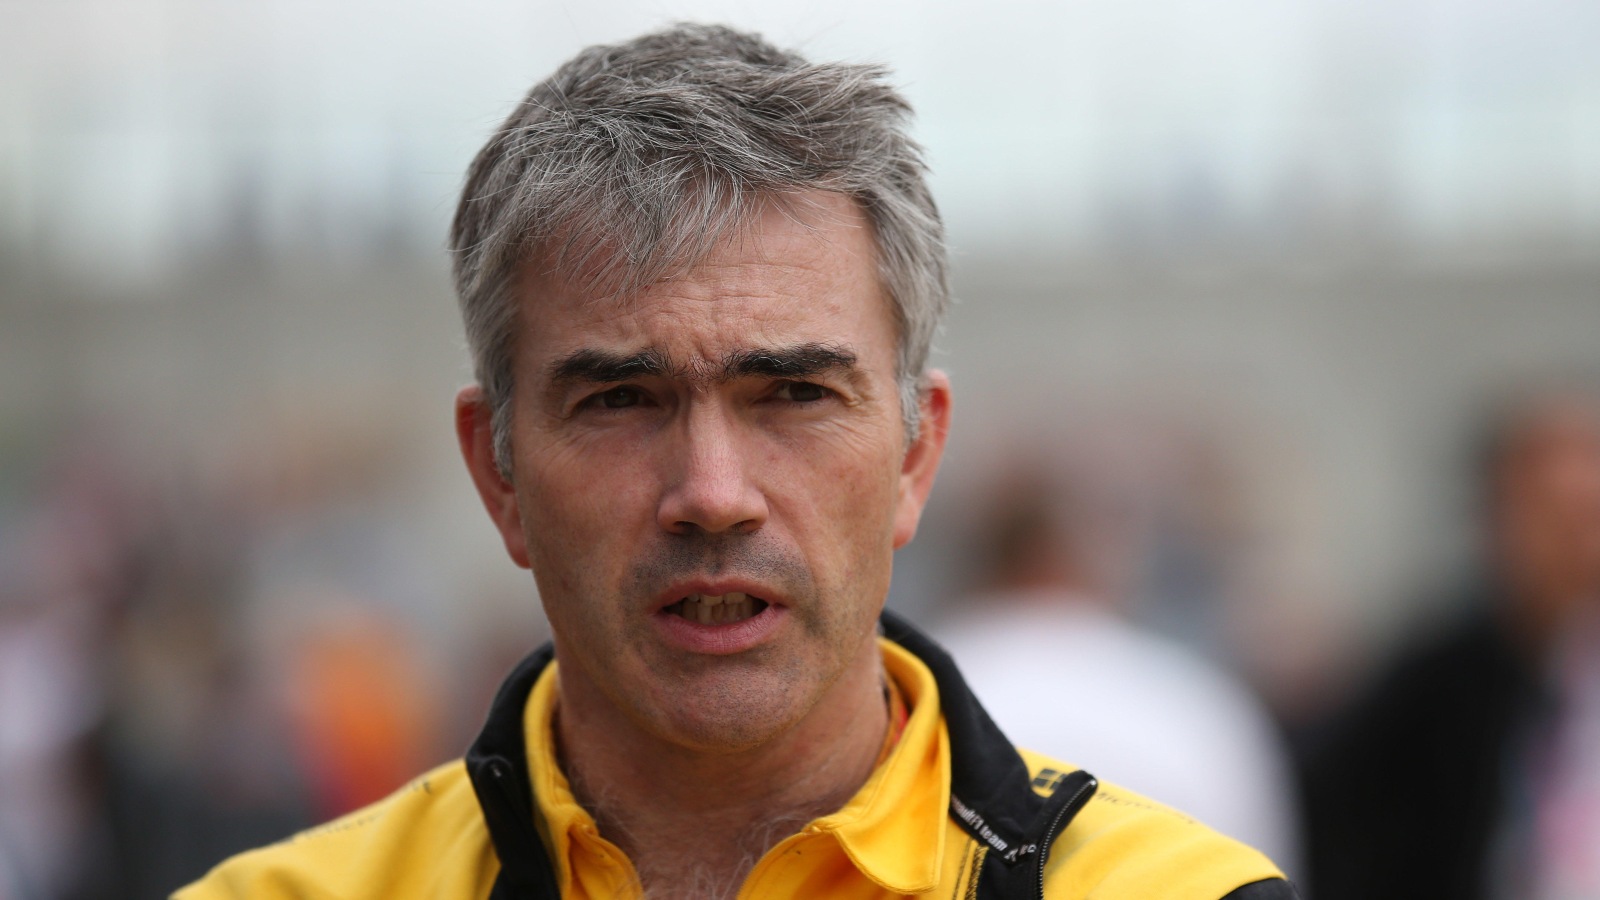 Former Renault employee Nick Chester. Silverstone, July, 2019.